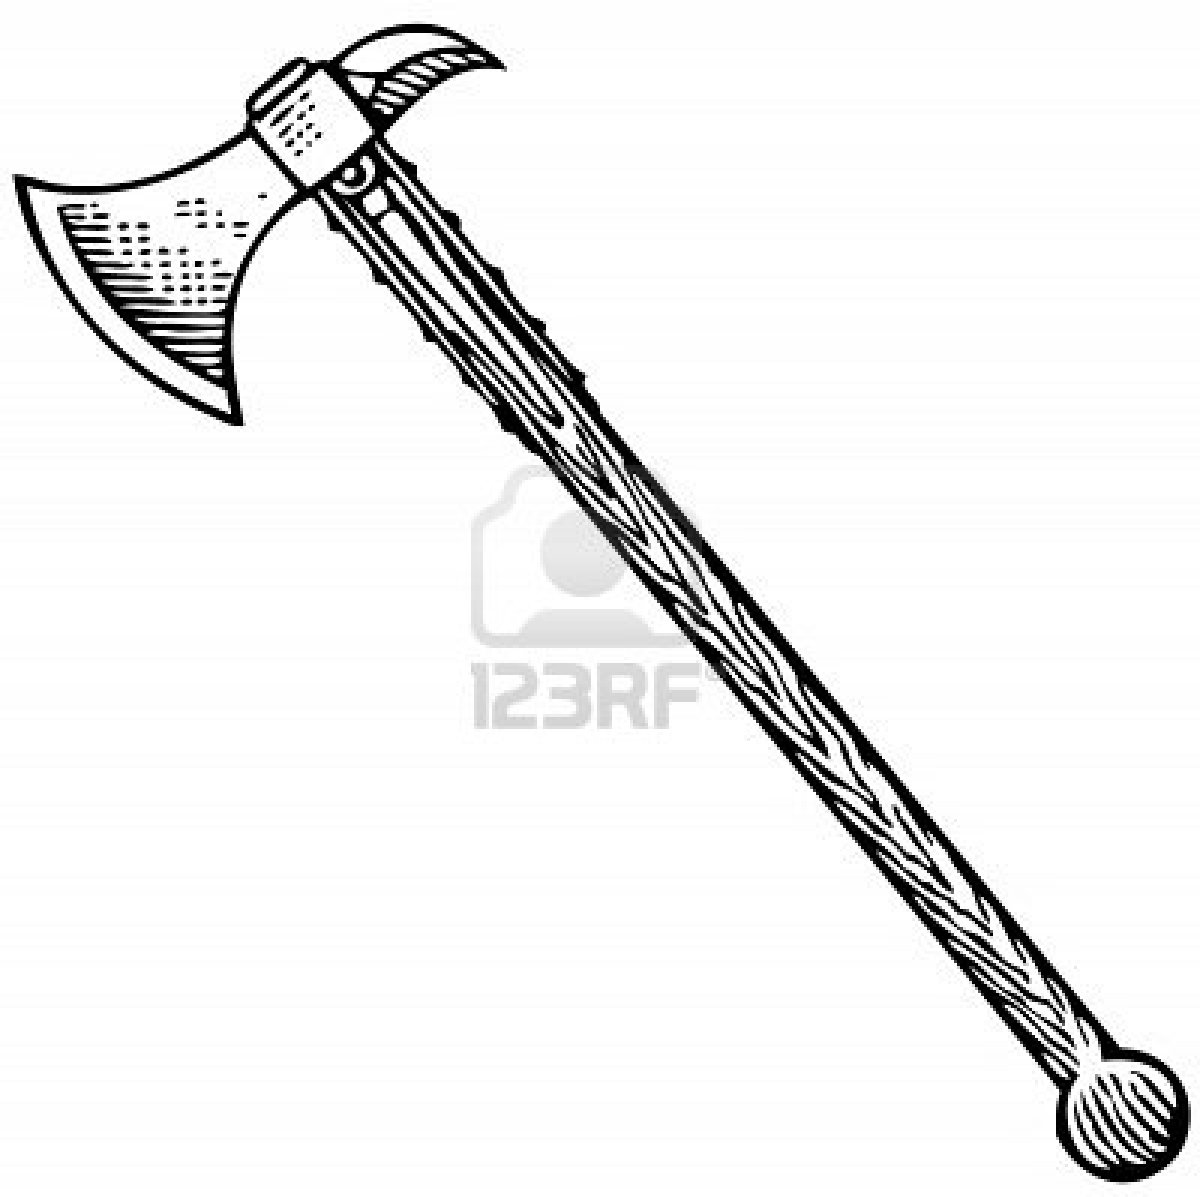 DIARY OF A GRANDFATHER: The axe man cometh-or why you do not sharpen an